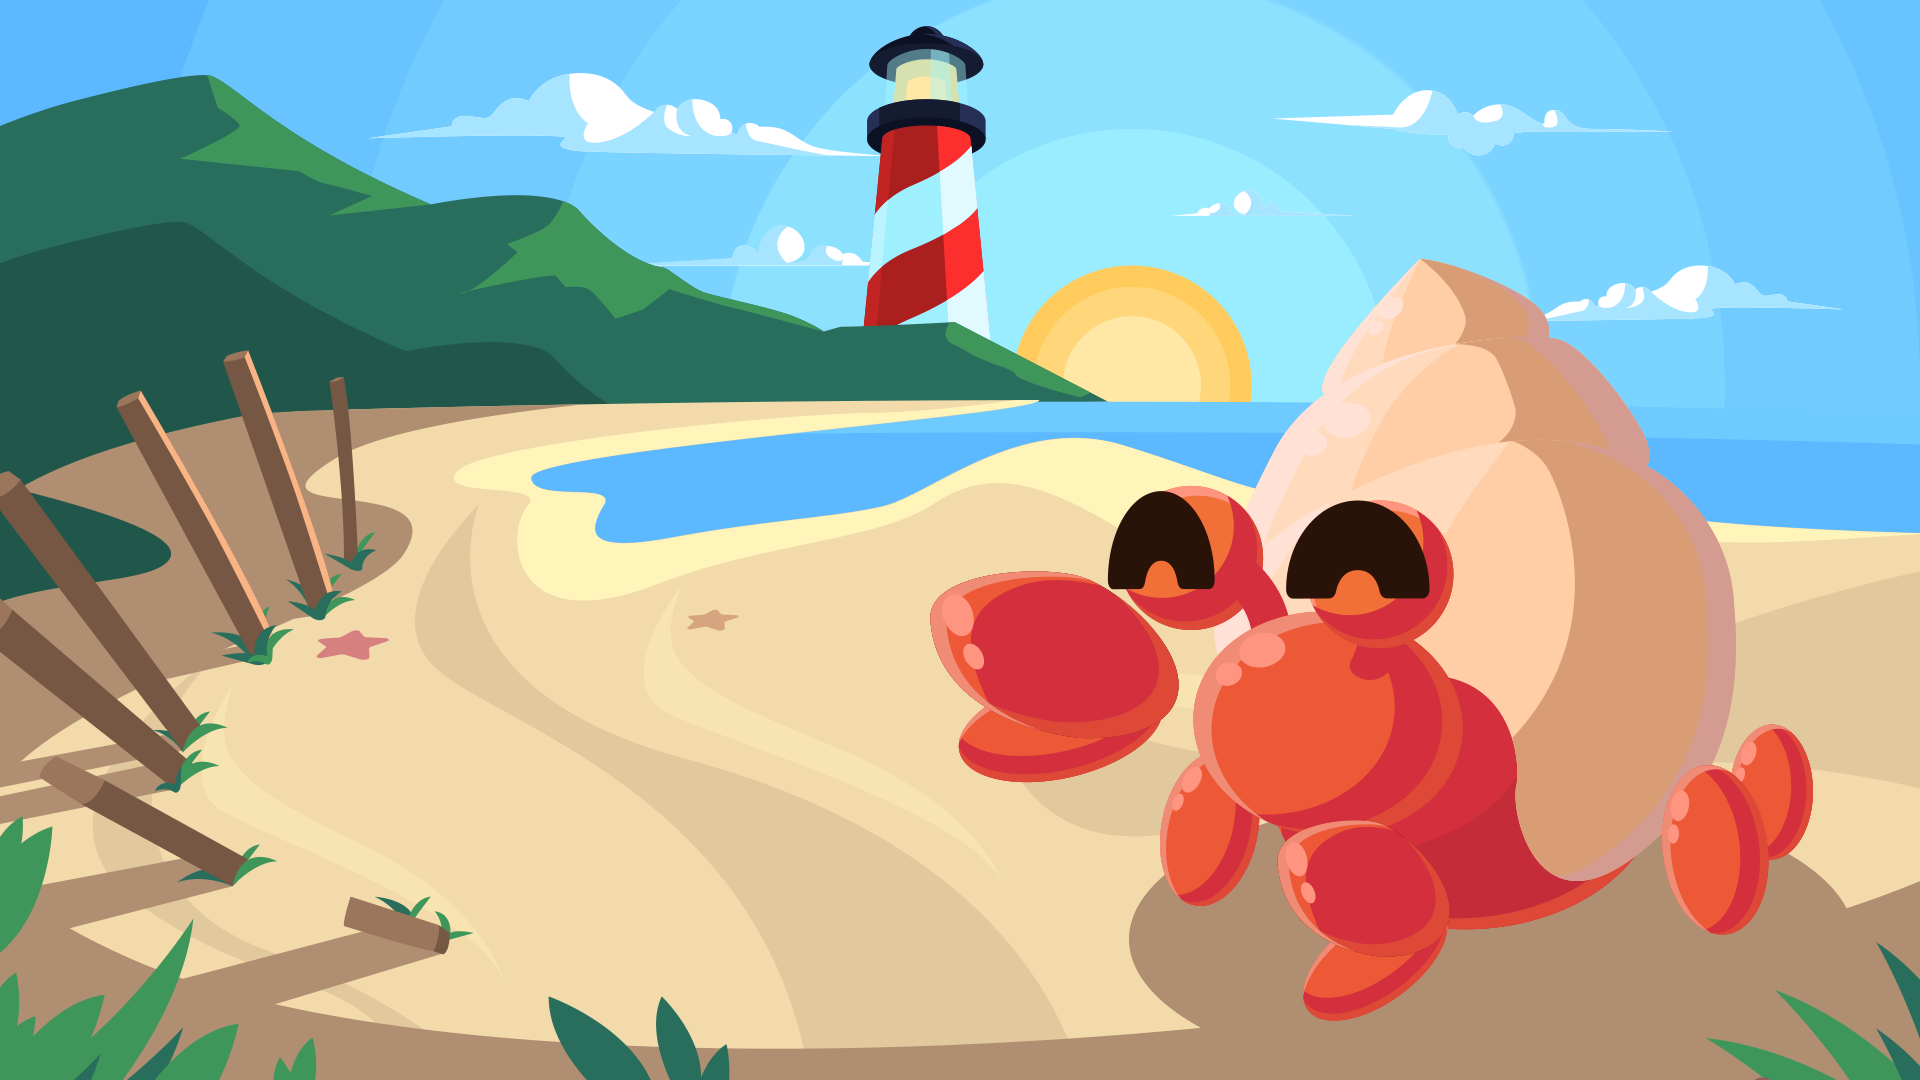 Hermit Crab walking on the beach in the sunshine, with a lighthouse in the background.